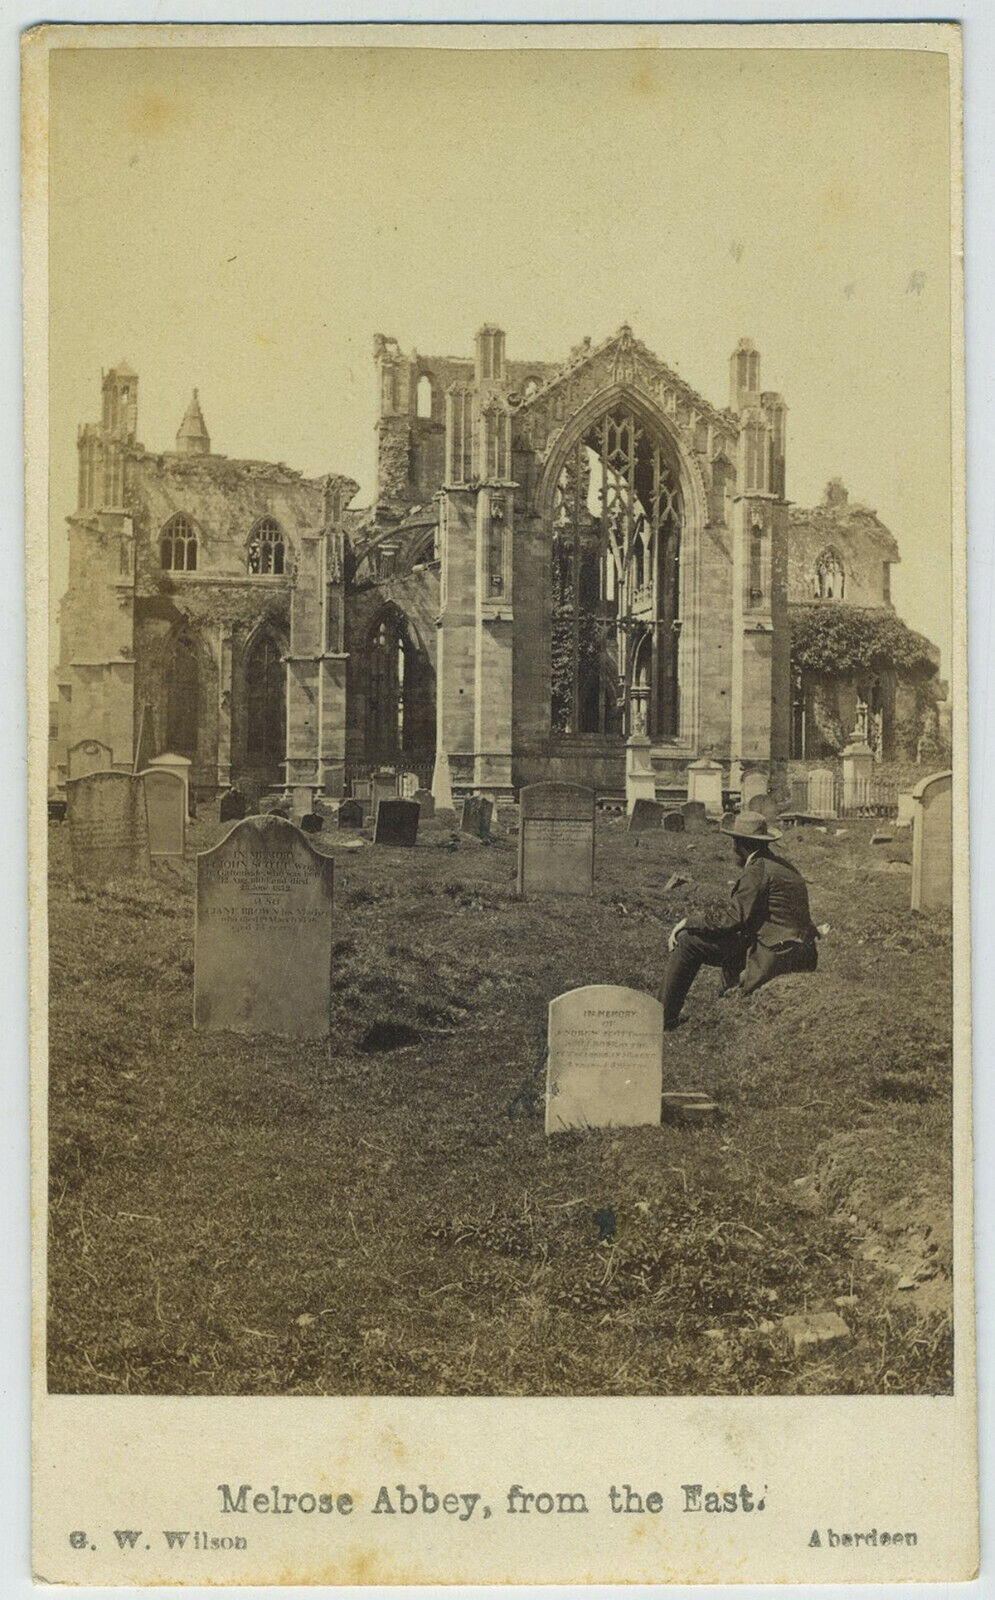 CDV circa 1870. Melrose Abbey, from the East. Wilson in Aberdeen. Scotland.